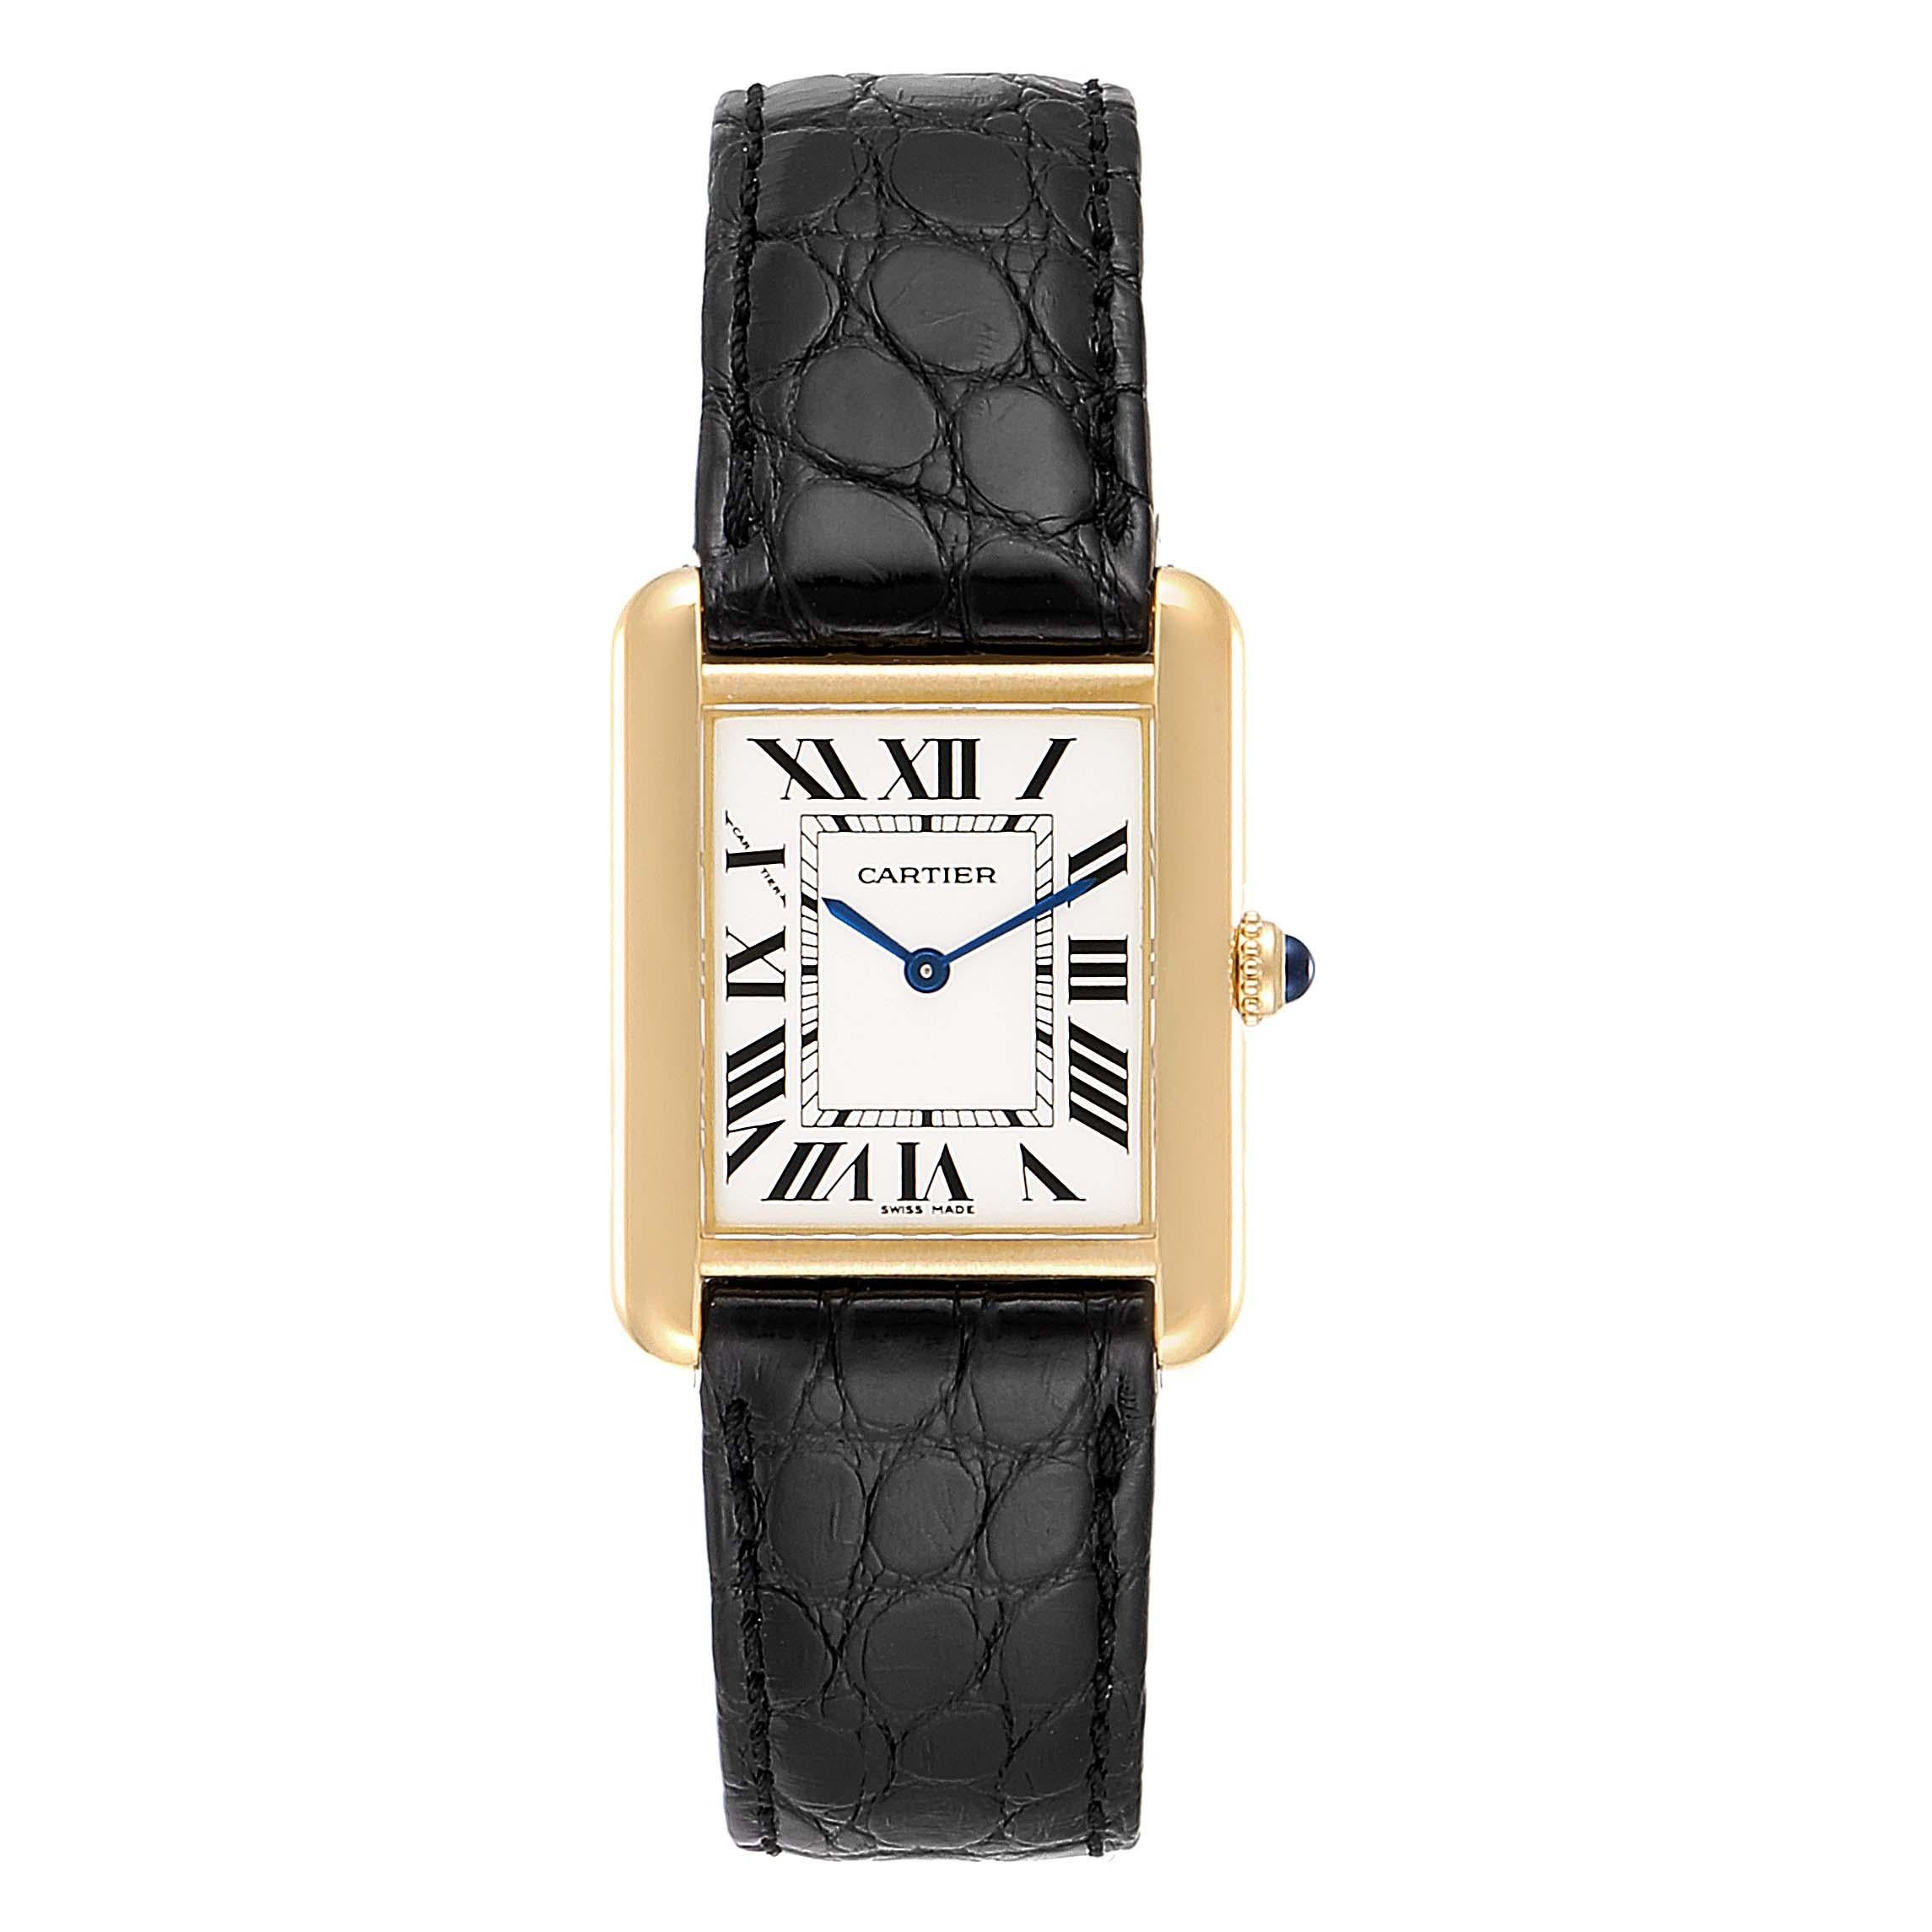 Cartier Tank Solo Yellow Gold Steel Black Strap Ladies Watch W1018755. Quartz movement. 18k yellow gold and steel back case 30.0 x 23.0 mm. Circular grained crown set with the blue spinel cabochon. . Scratch resistant sapphire crystal. Opaline